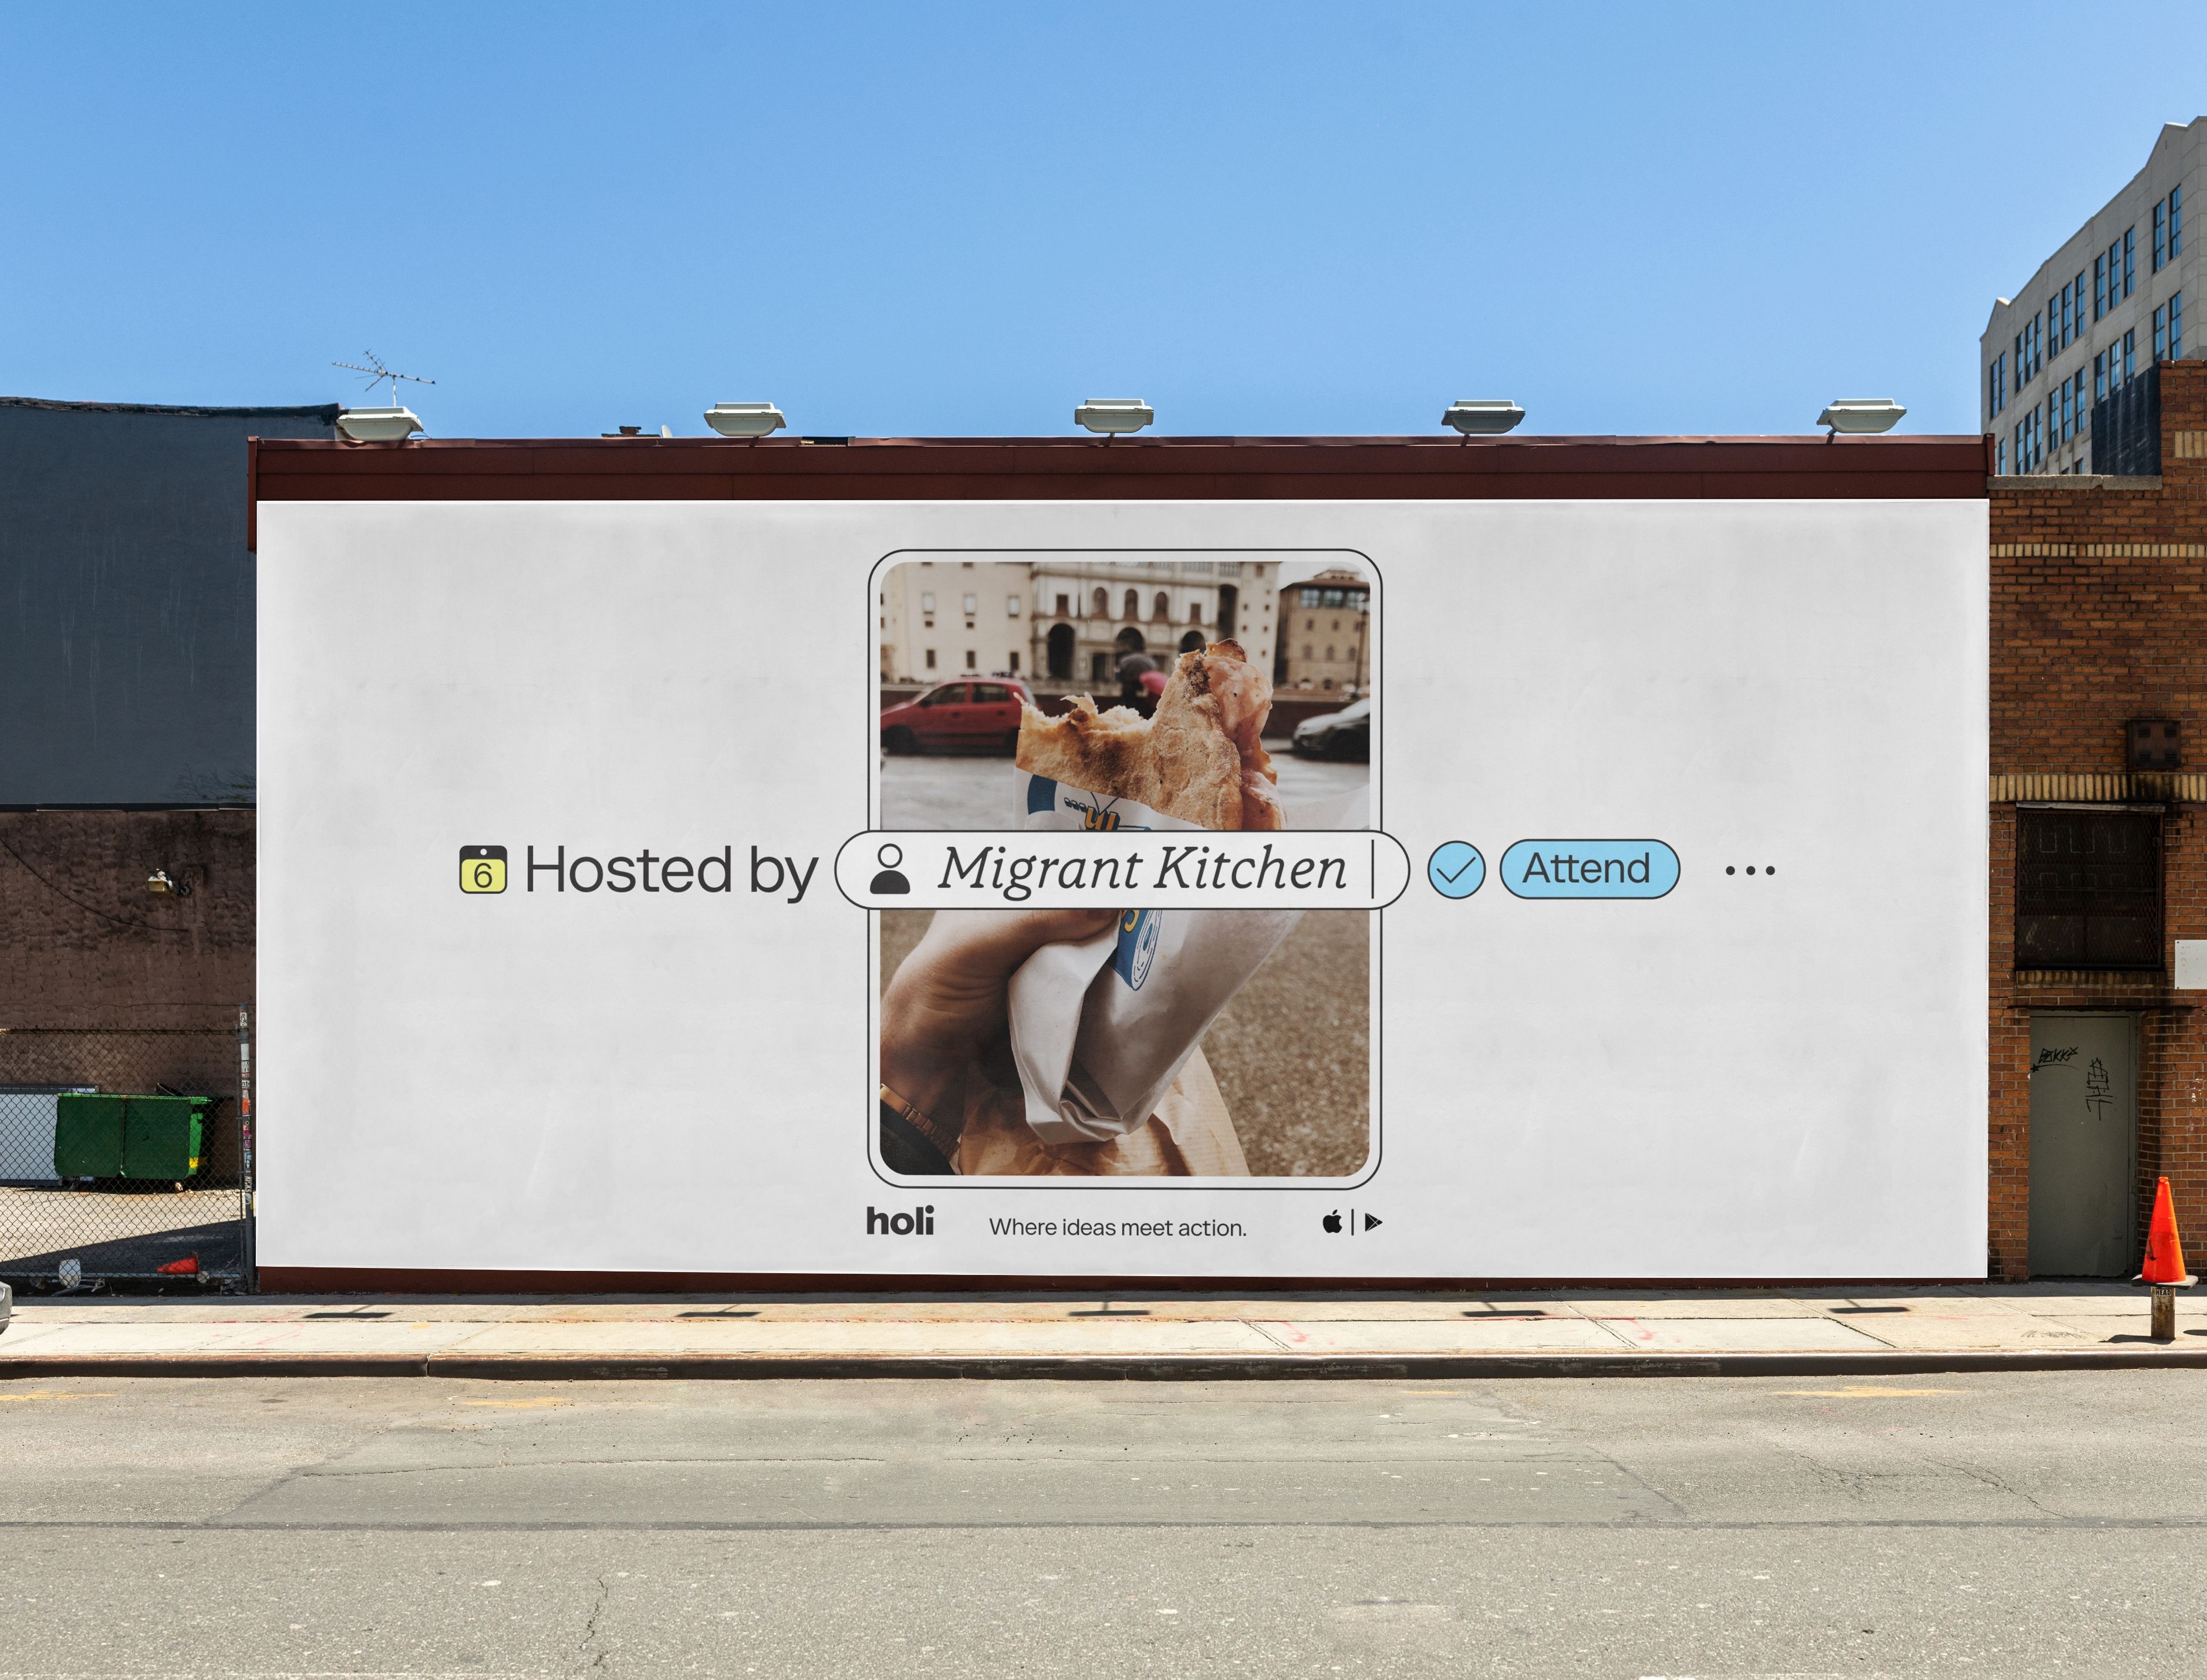 Out of home billboard showing an event hosted by Migrant Kitchen on the Holi app